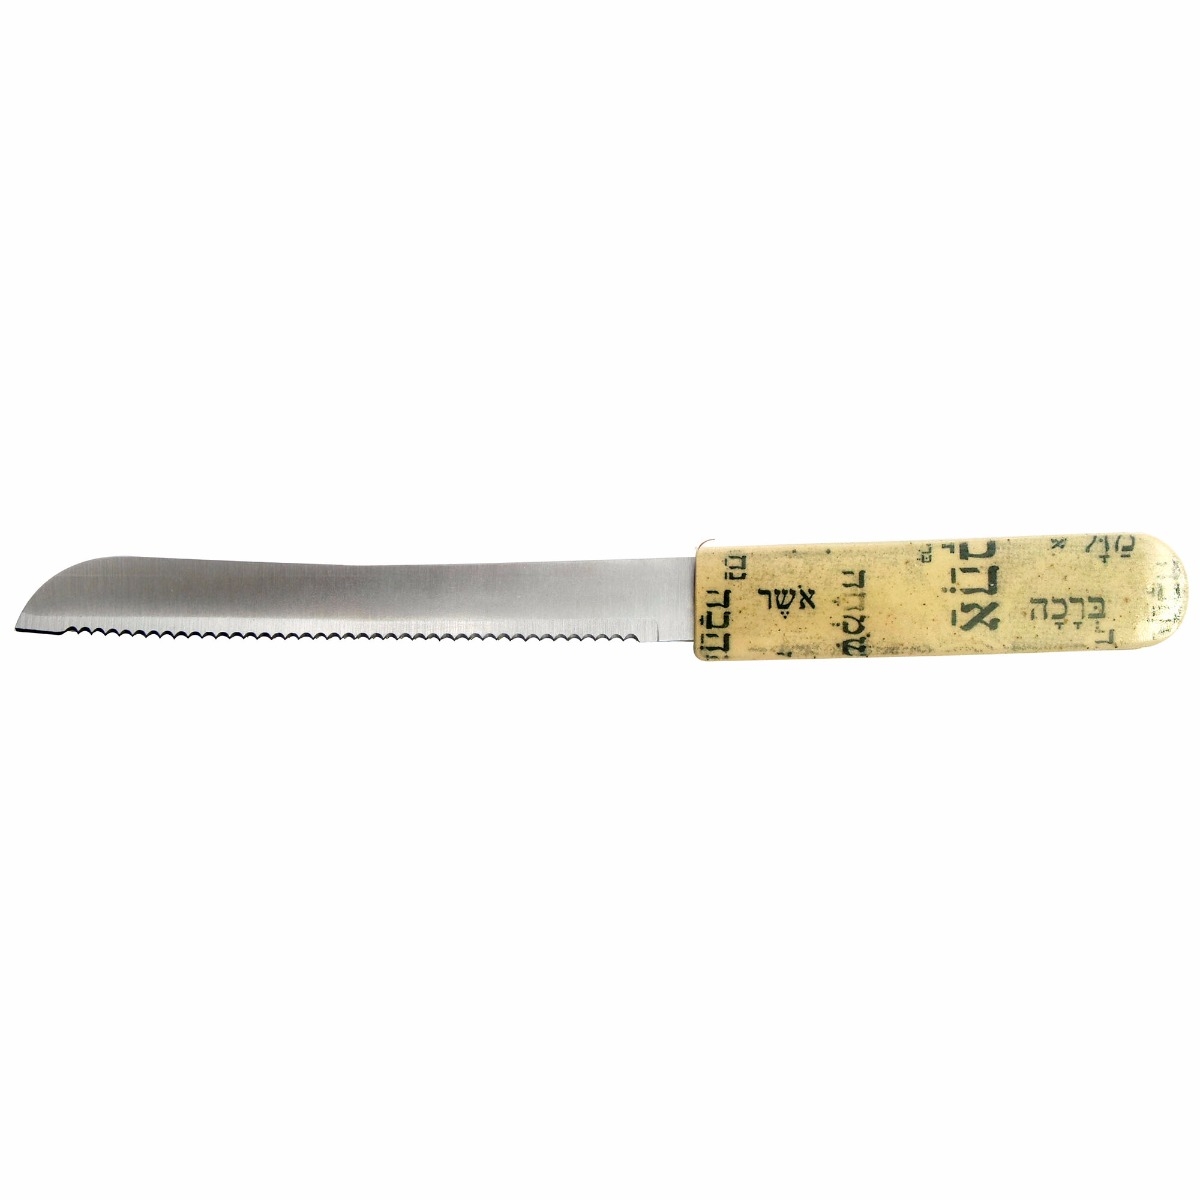 Ceramic and Stainless Steel Challah Knife with Hebrew Blessings - 1